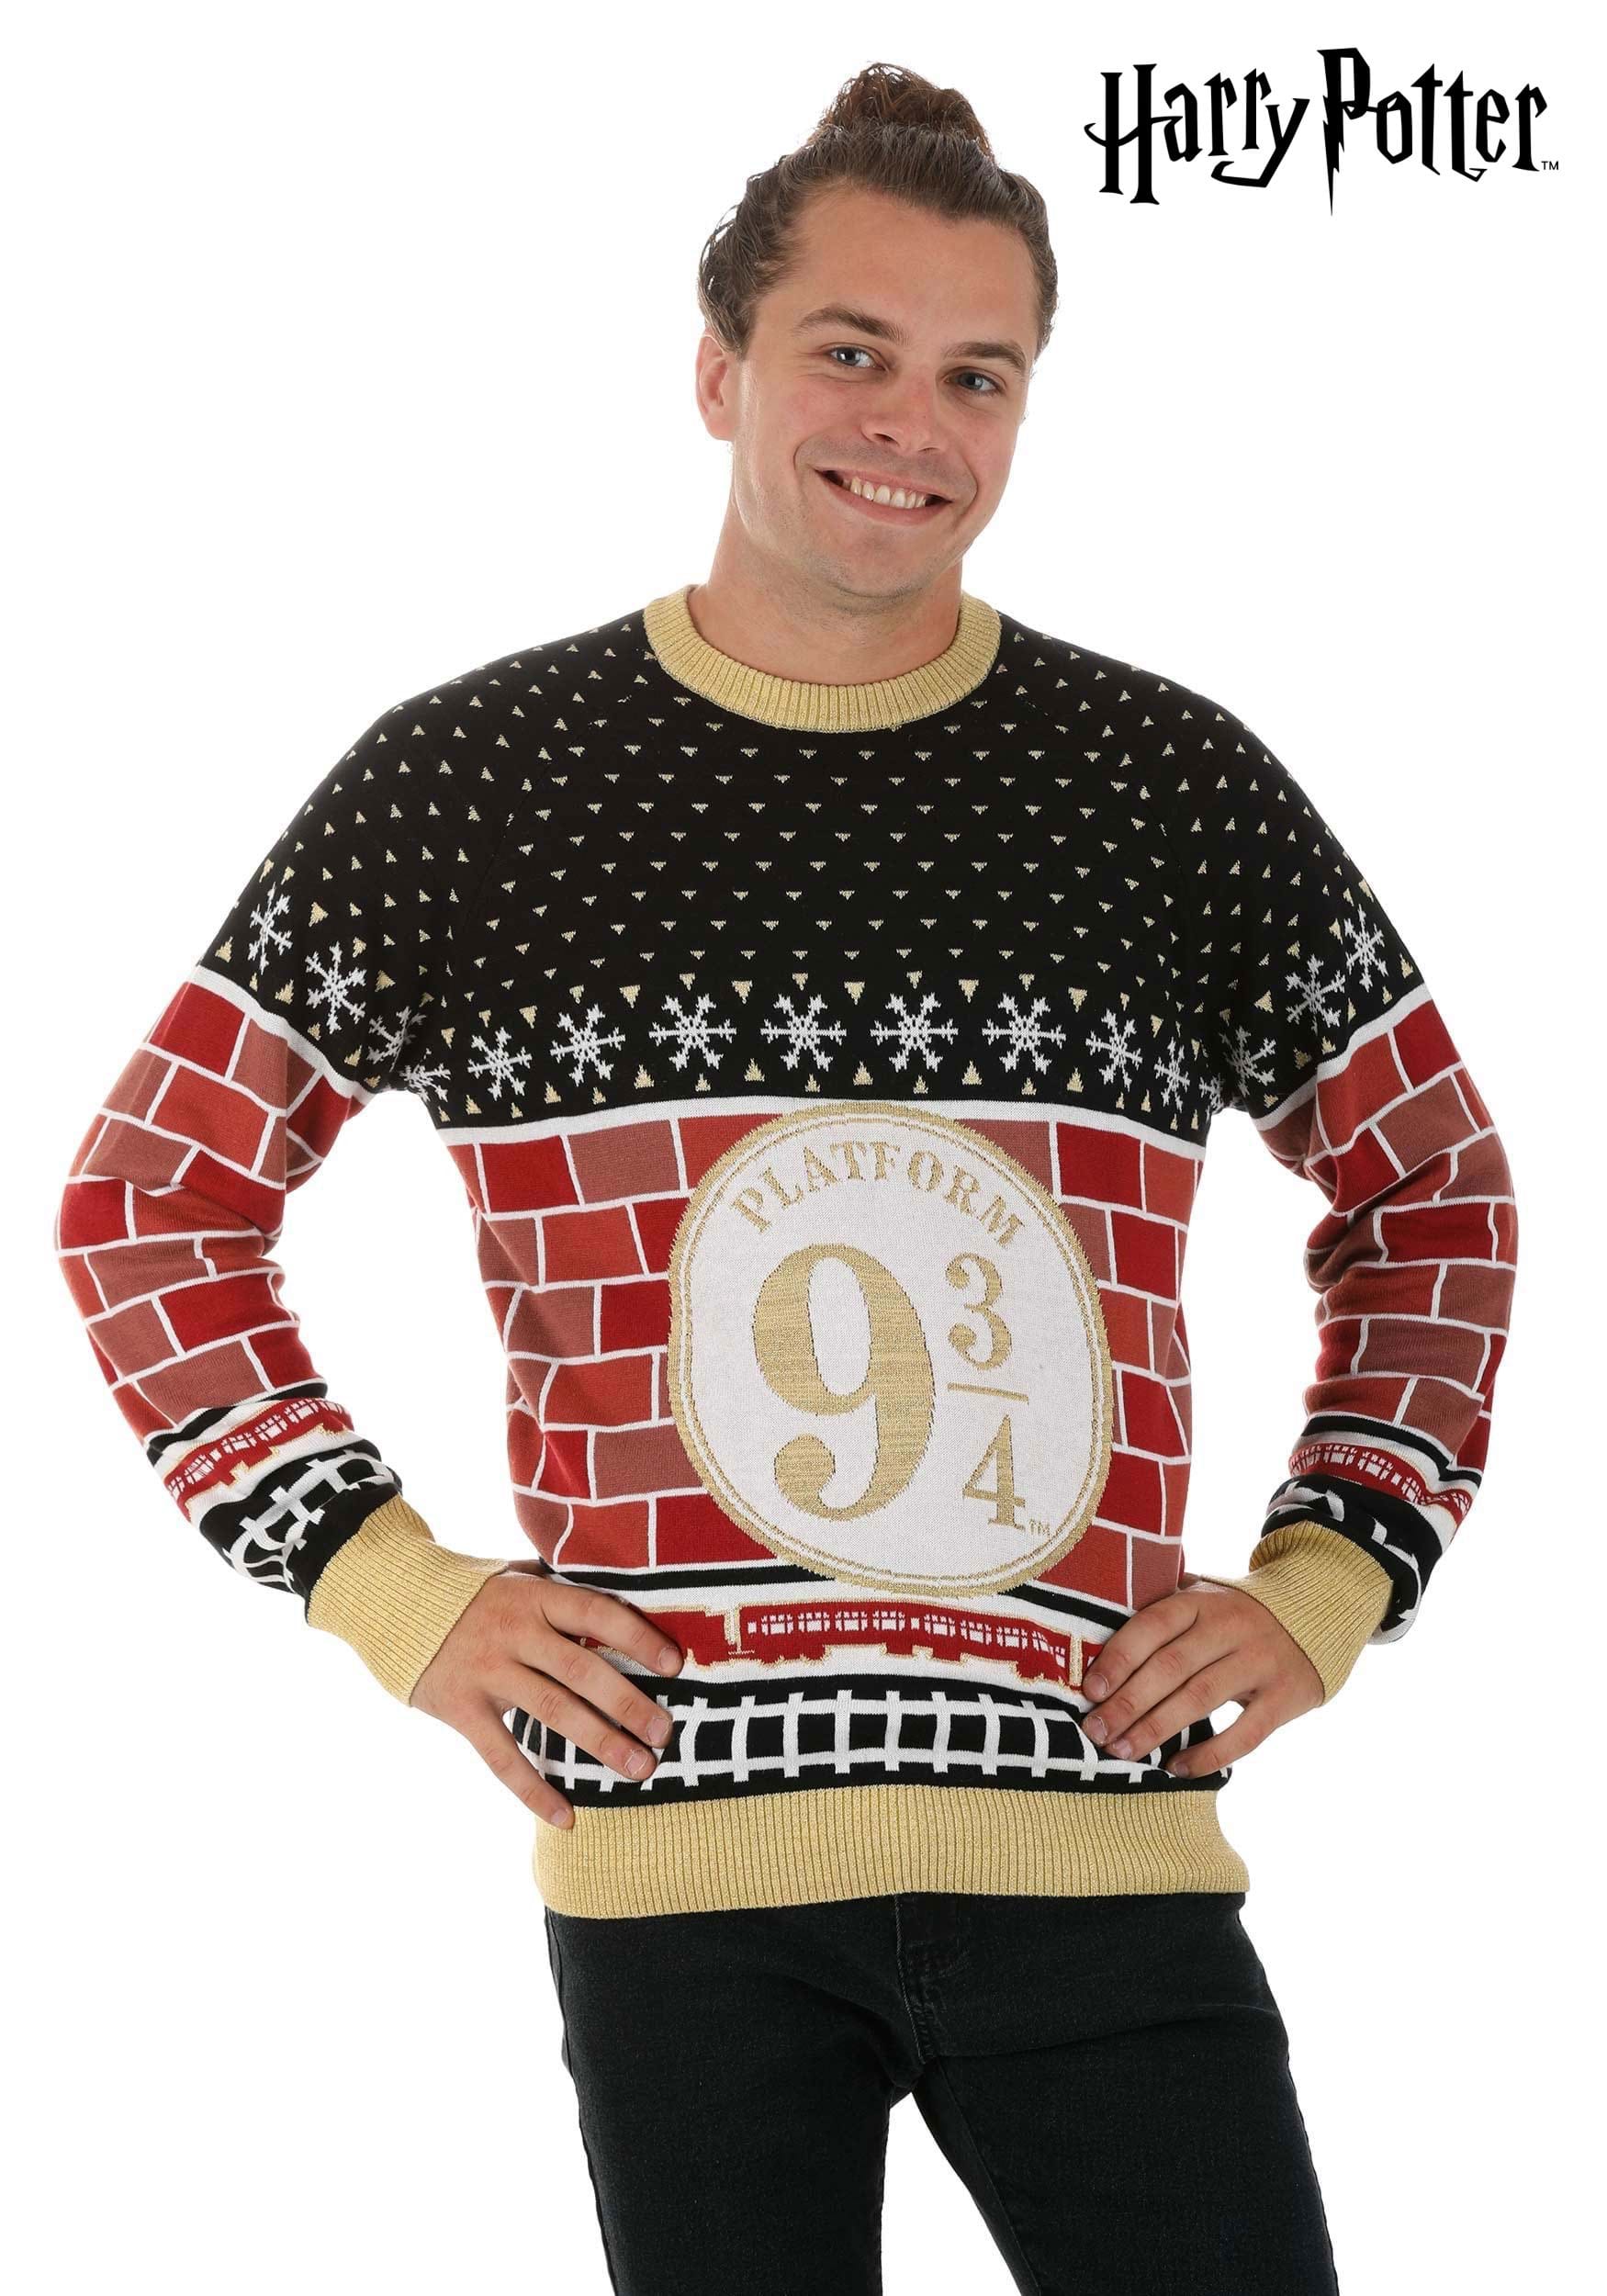 Platform 9 3/4 Harry Potter Christmas Sweater For Adults